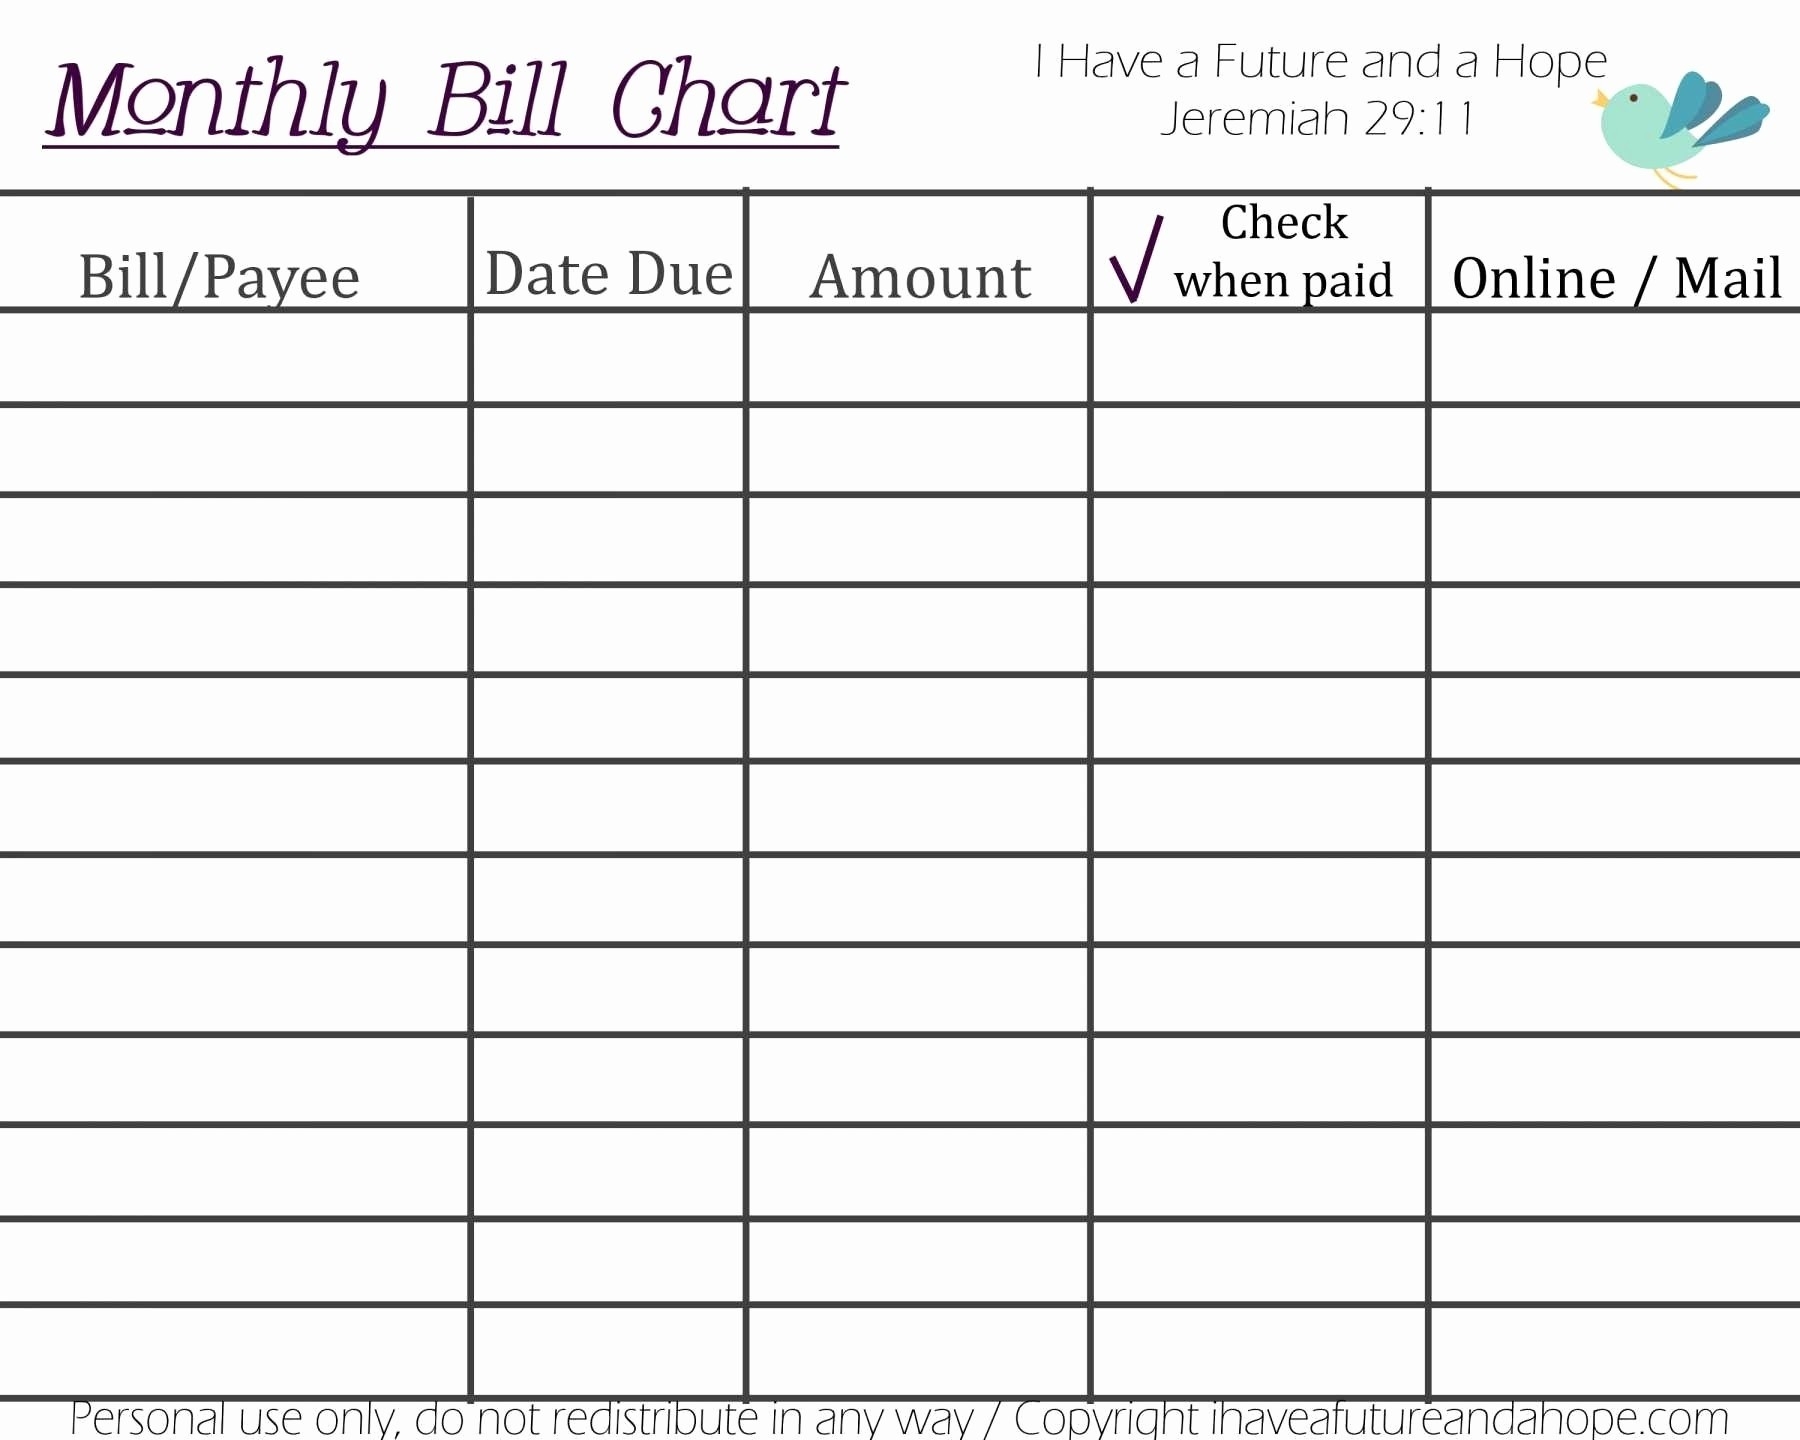 Free Printable Bill Checklist Monthly Pay | Martinforfreedom  Monthly Bill Bill Checklist With Confirmation Number Column